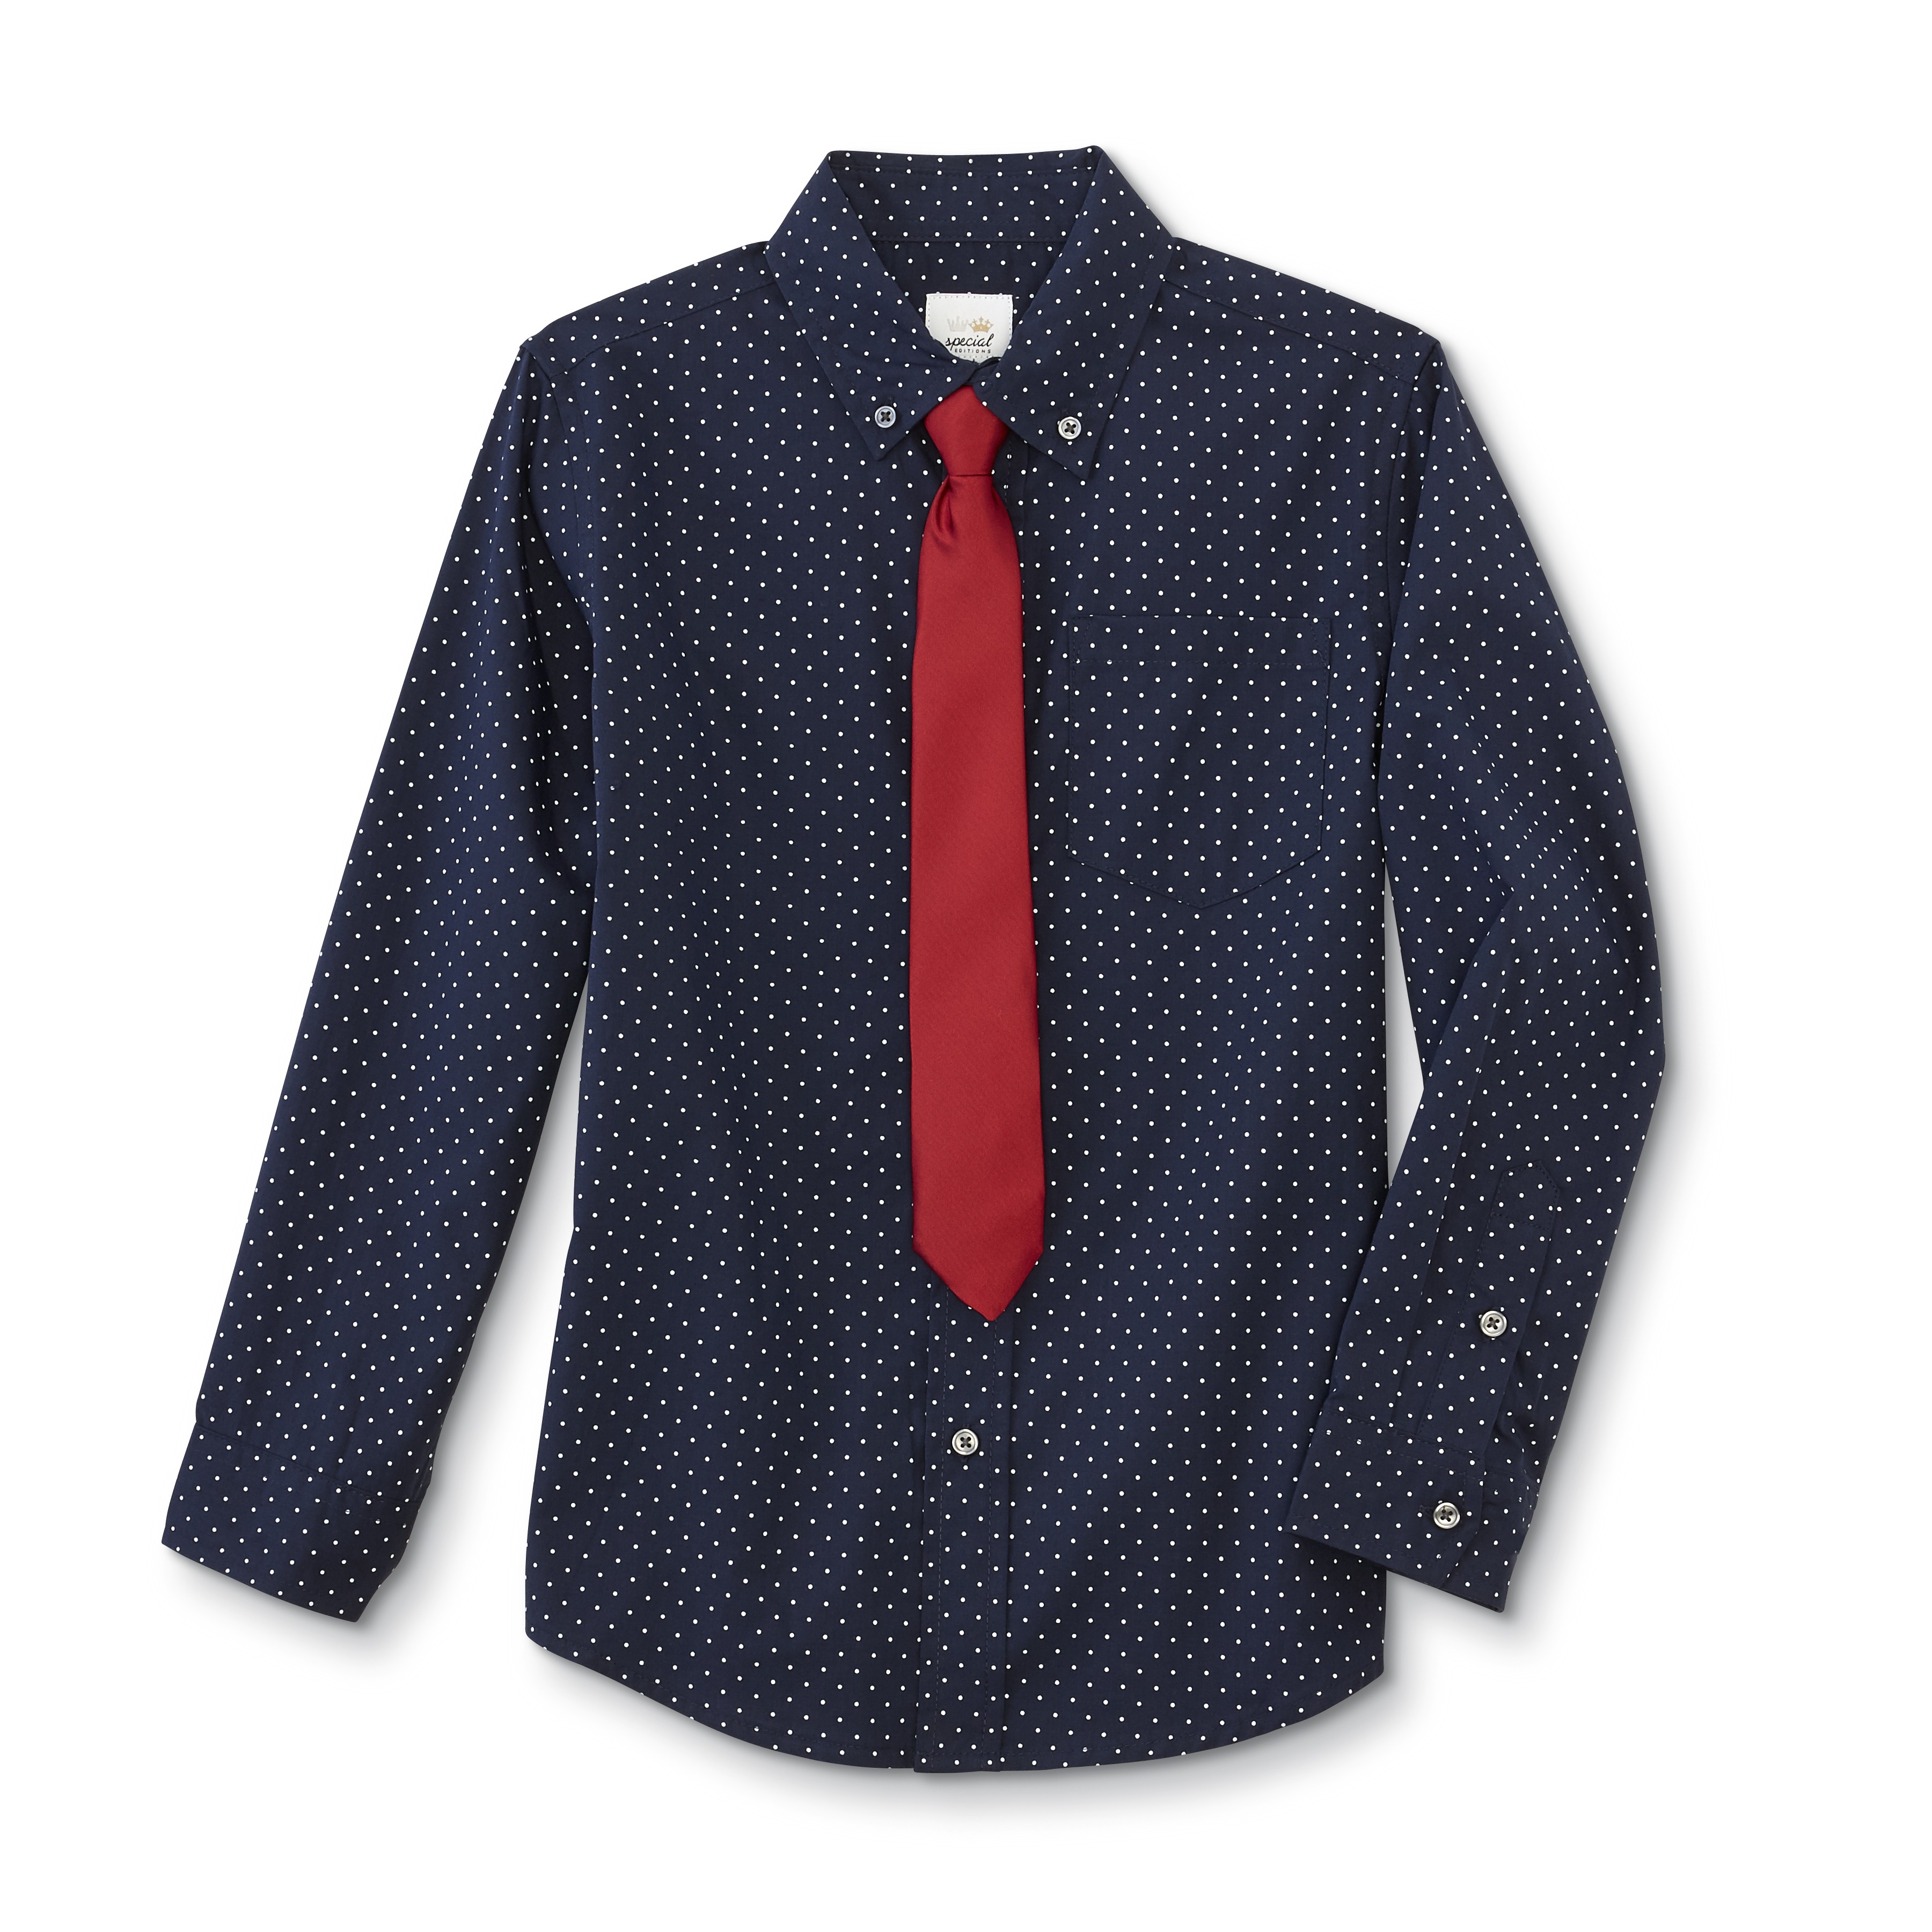 Special Editions Shirt & Tie Sets